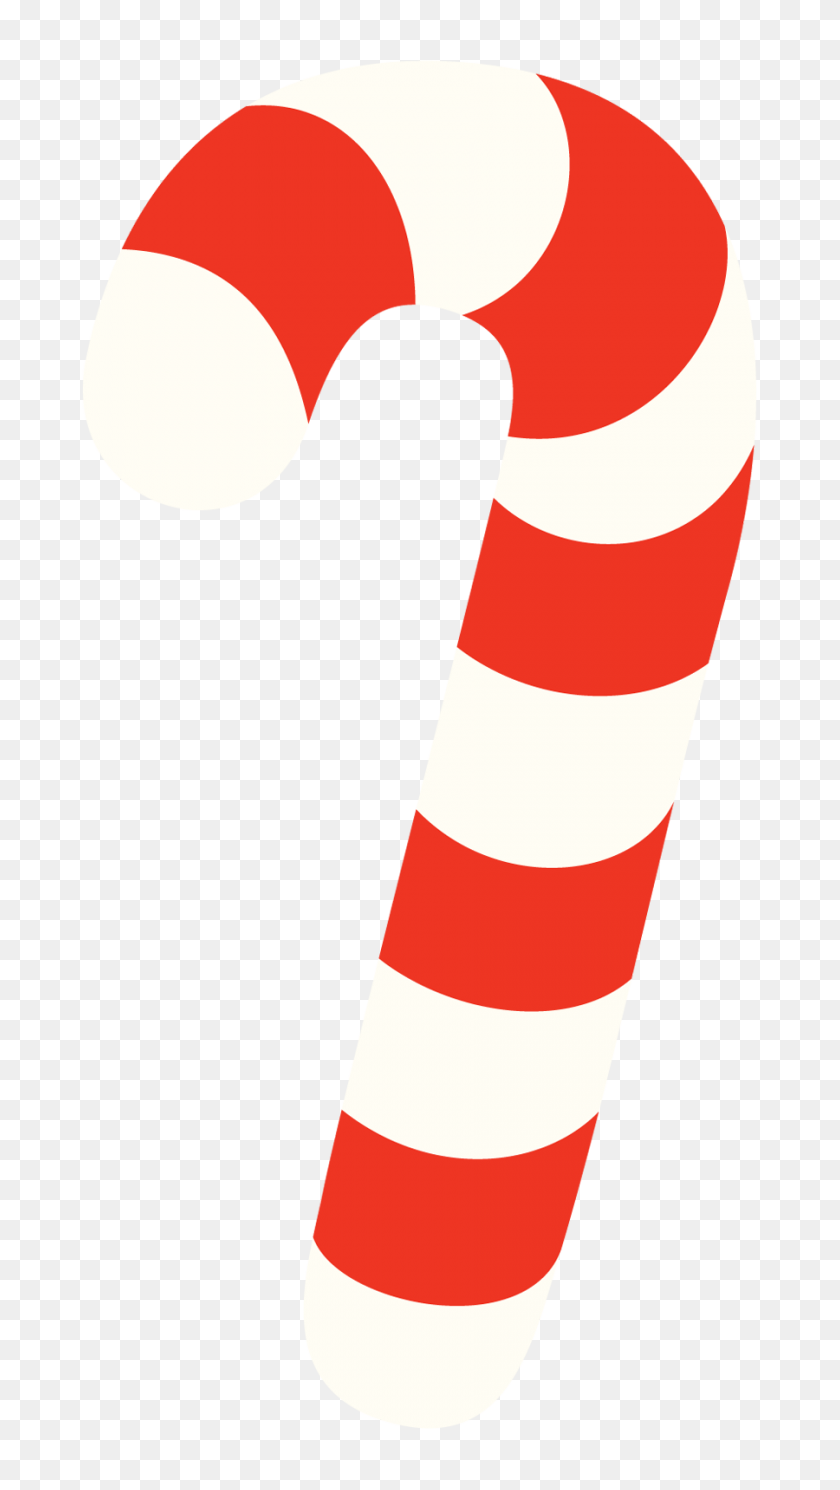 900x1650 Free Candy Cane Clipart - Christmas Cross Clipart